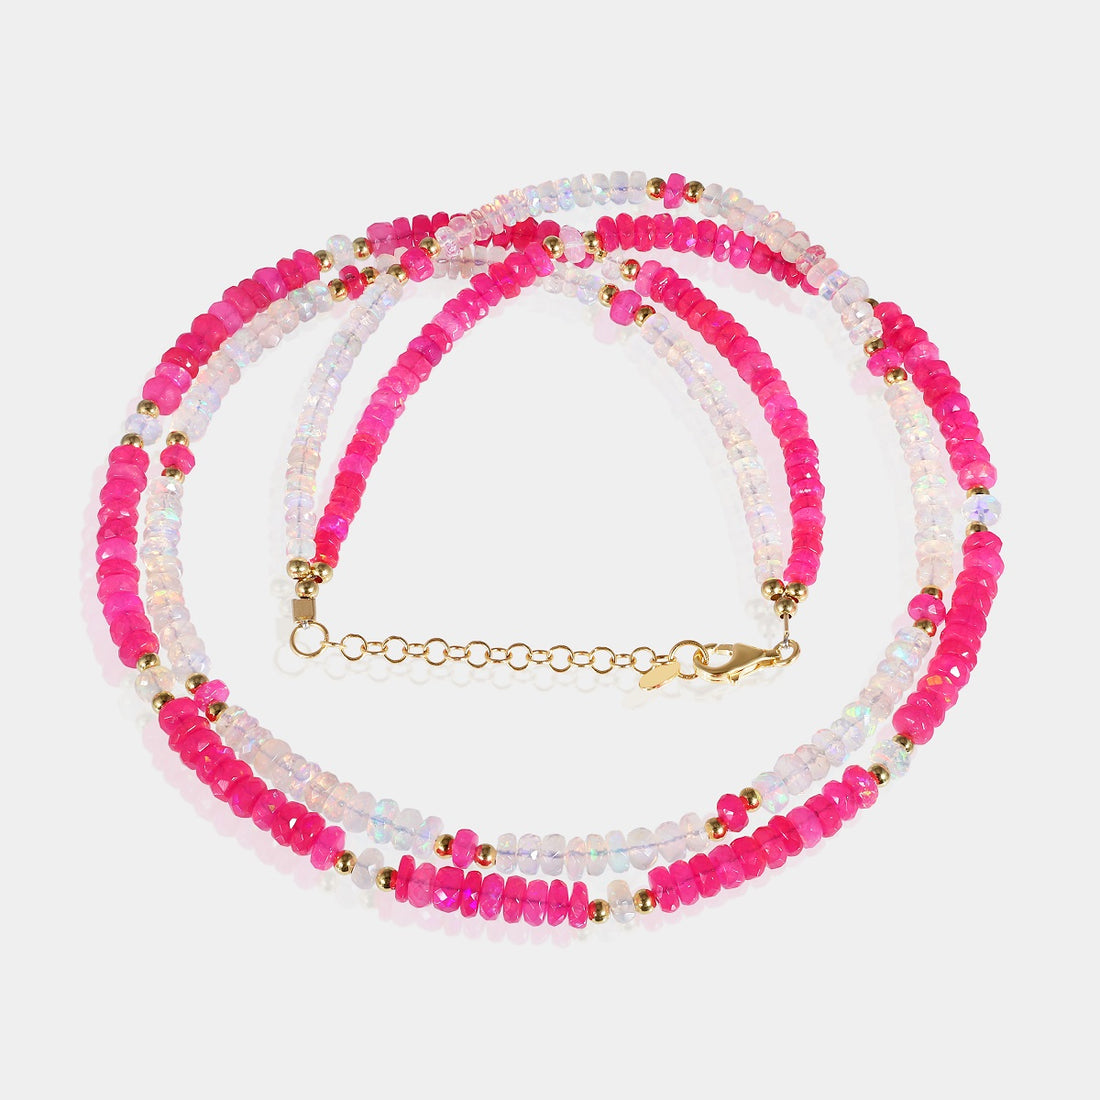 Pink and White Beads Double Layer Gemstone Necklace